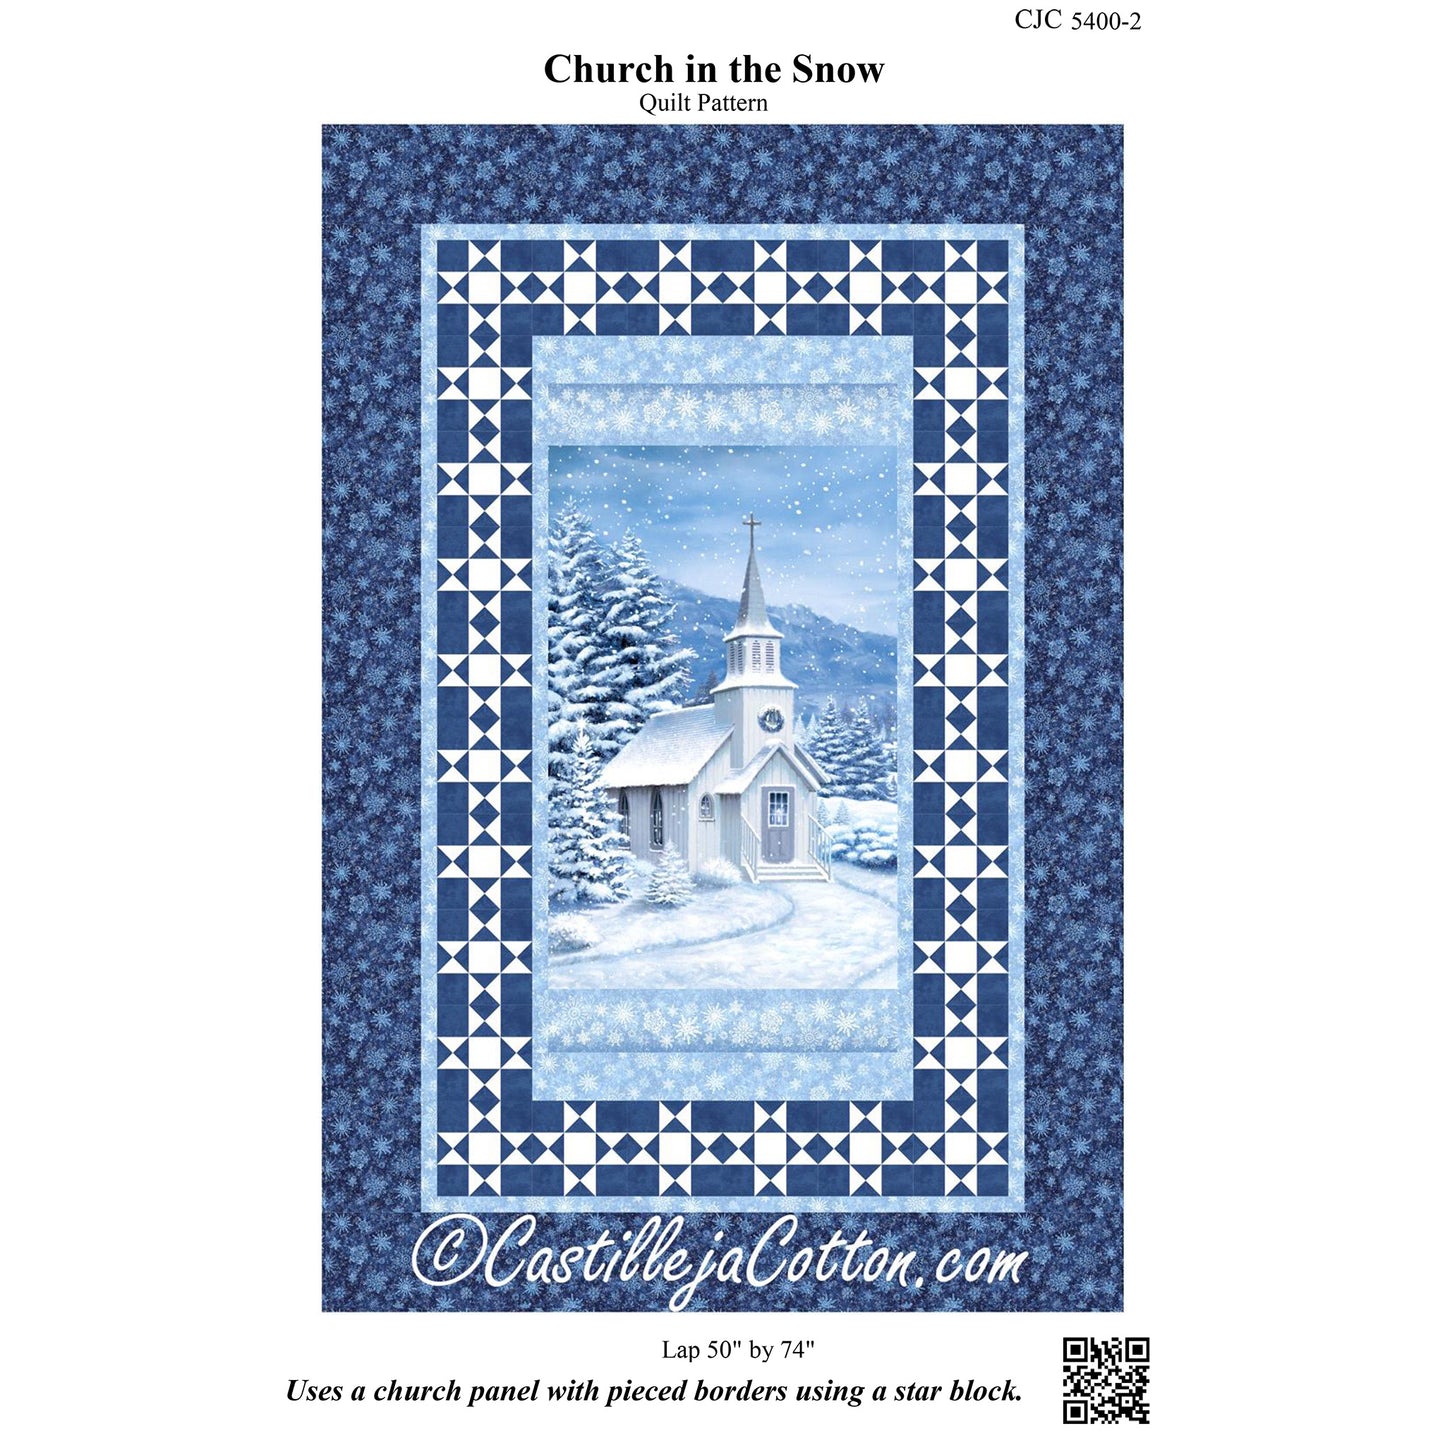 Cover image of pattern for Church in the Snow Quilt.